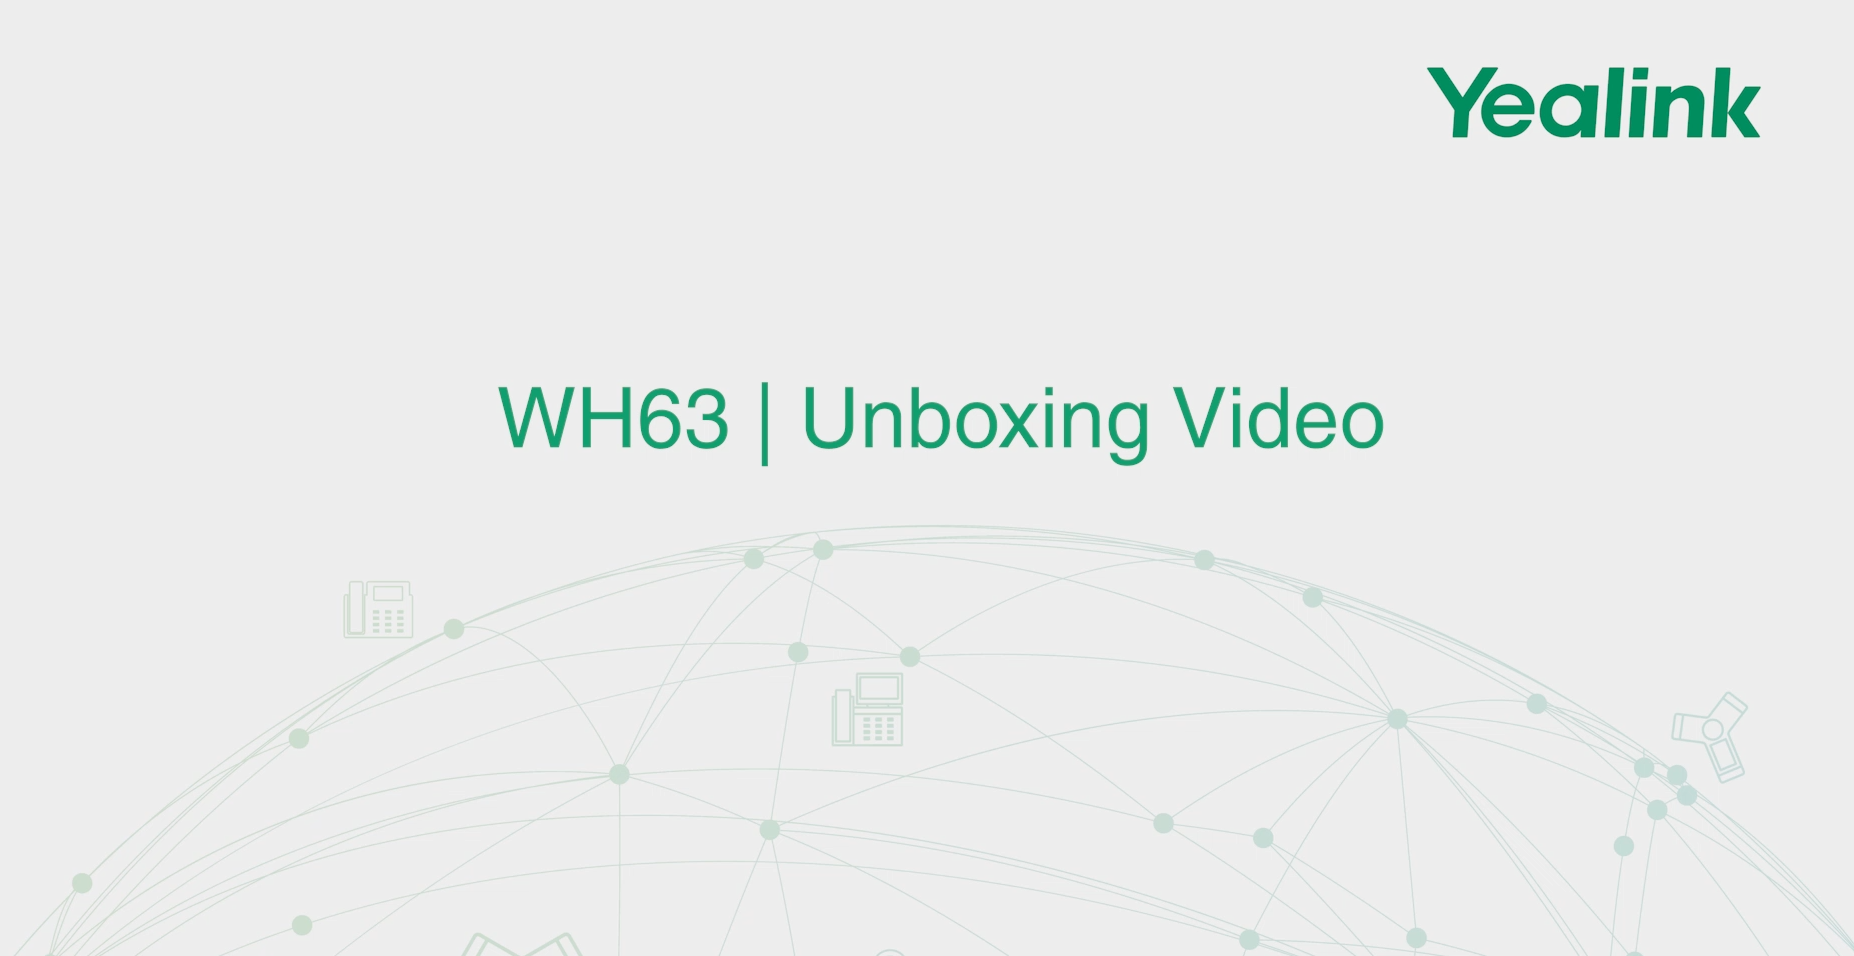 WH66 Unboxing Video